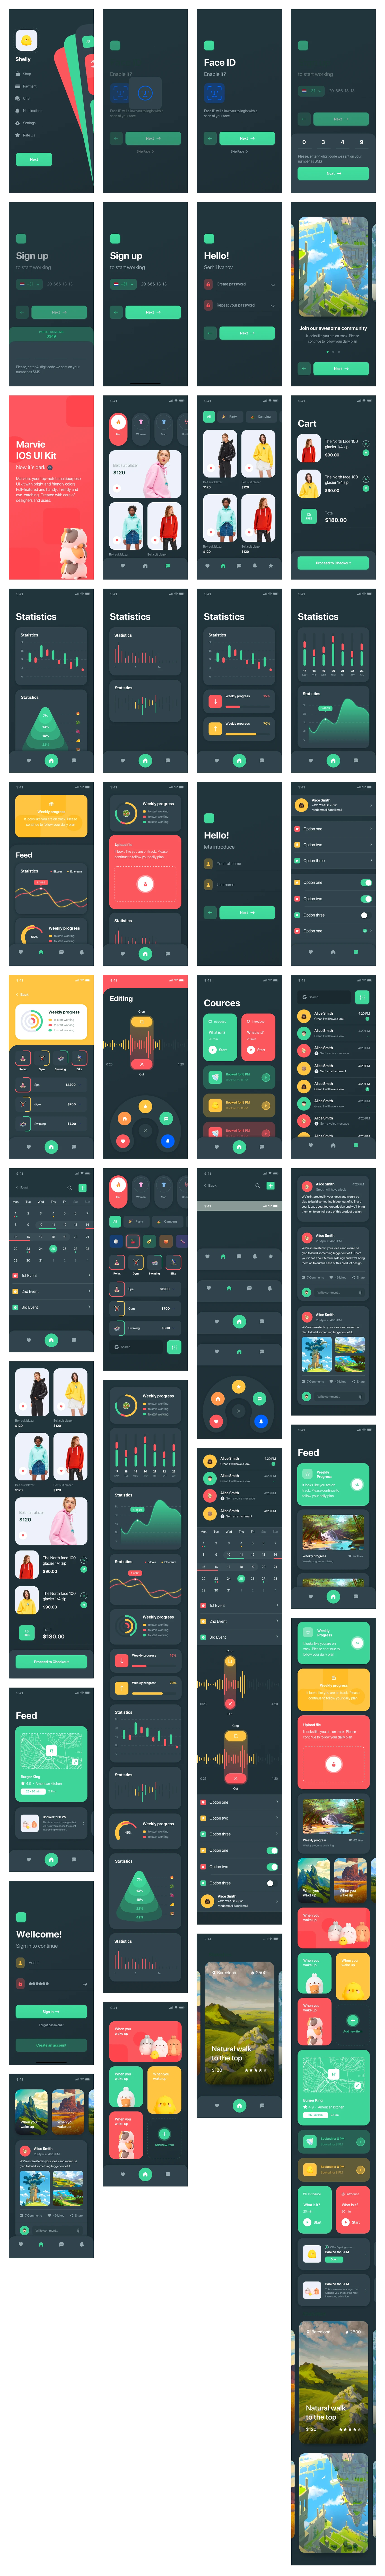 Marvie - Free iOS UI Kit for Sketch and Figma - Marvie✨ is your top-notch multipurpose UI kit with bright and friendly colors. Full-featured and handy. Trendy and eye-catching. Created with care of designers and users. And now in Dark mode! All components and symbols are named, well-organized and ready to use. It's easy to edit and replace in Sketch and Figma. Color palette, typography and components are customizable to create your personal unique styles in just a few clicks.